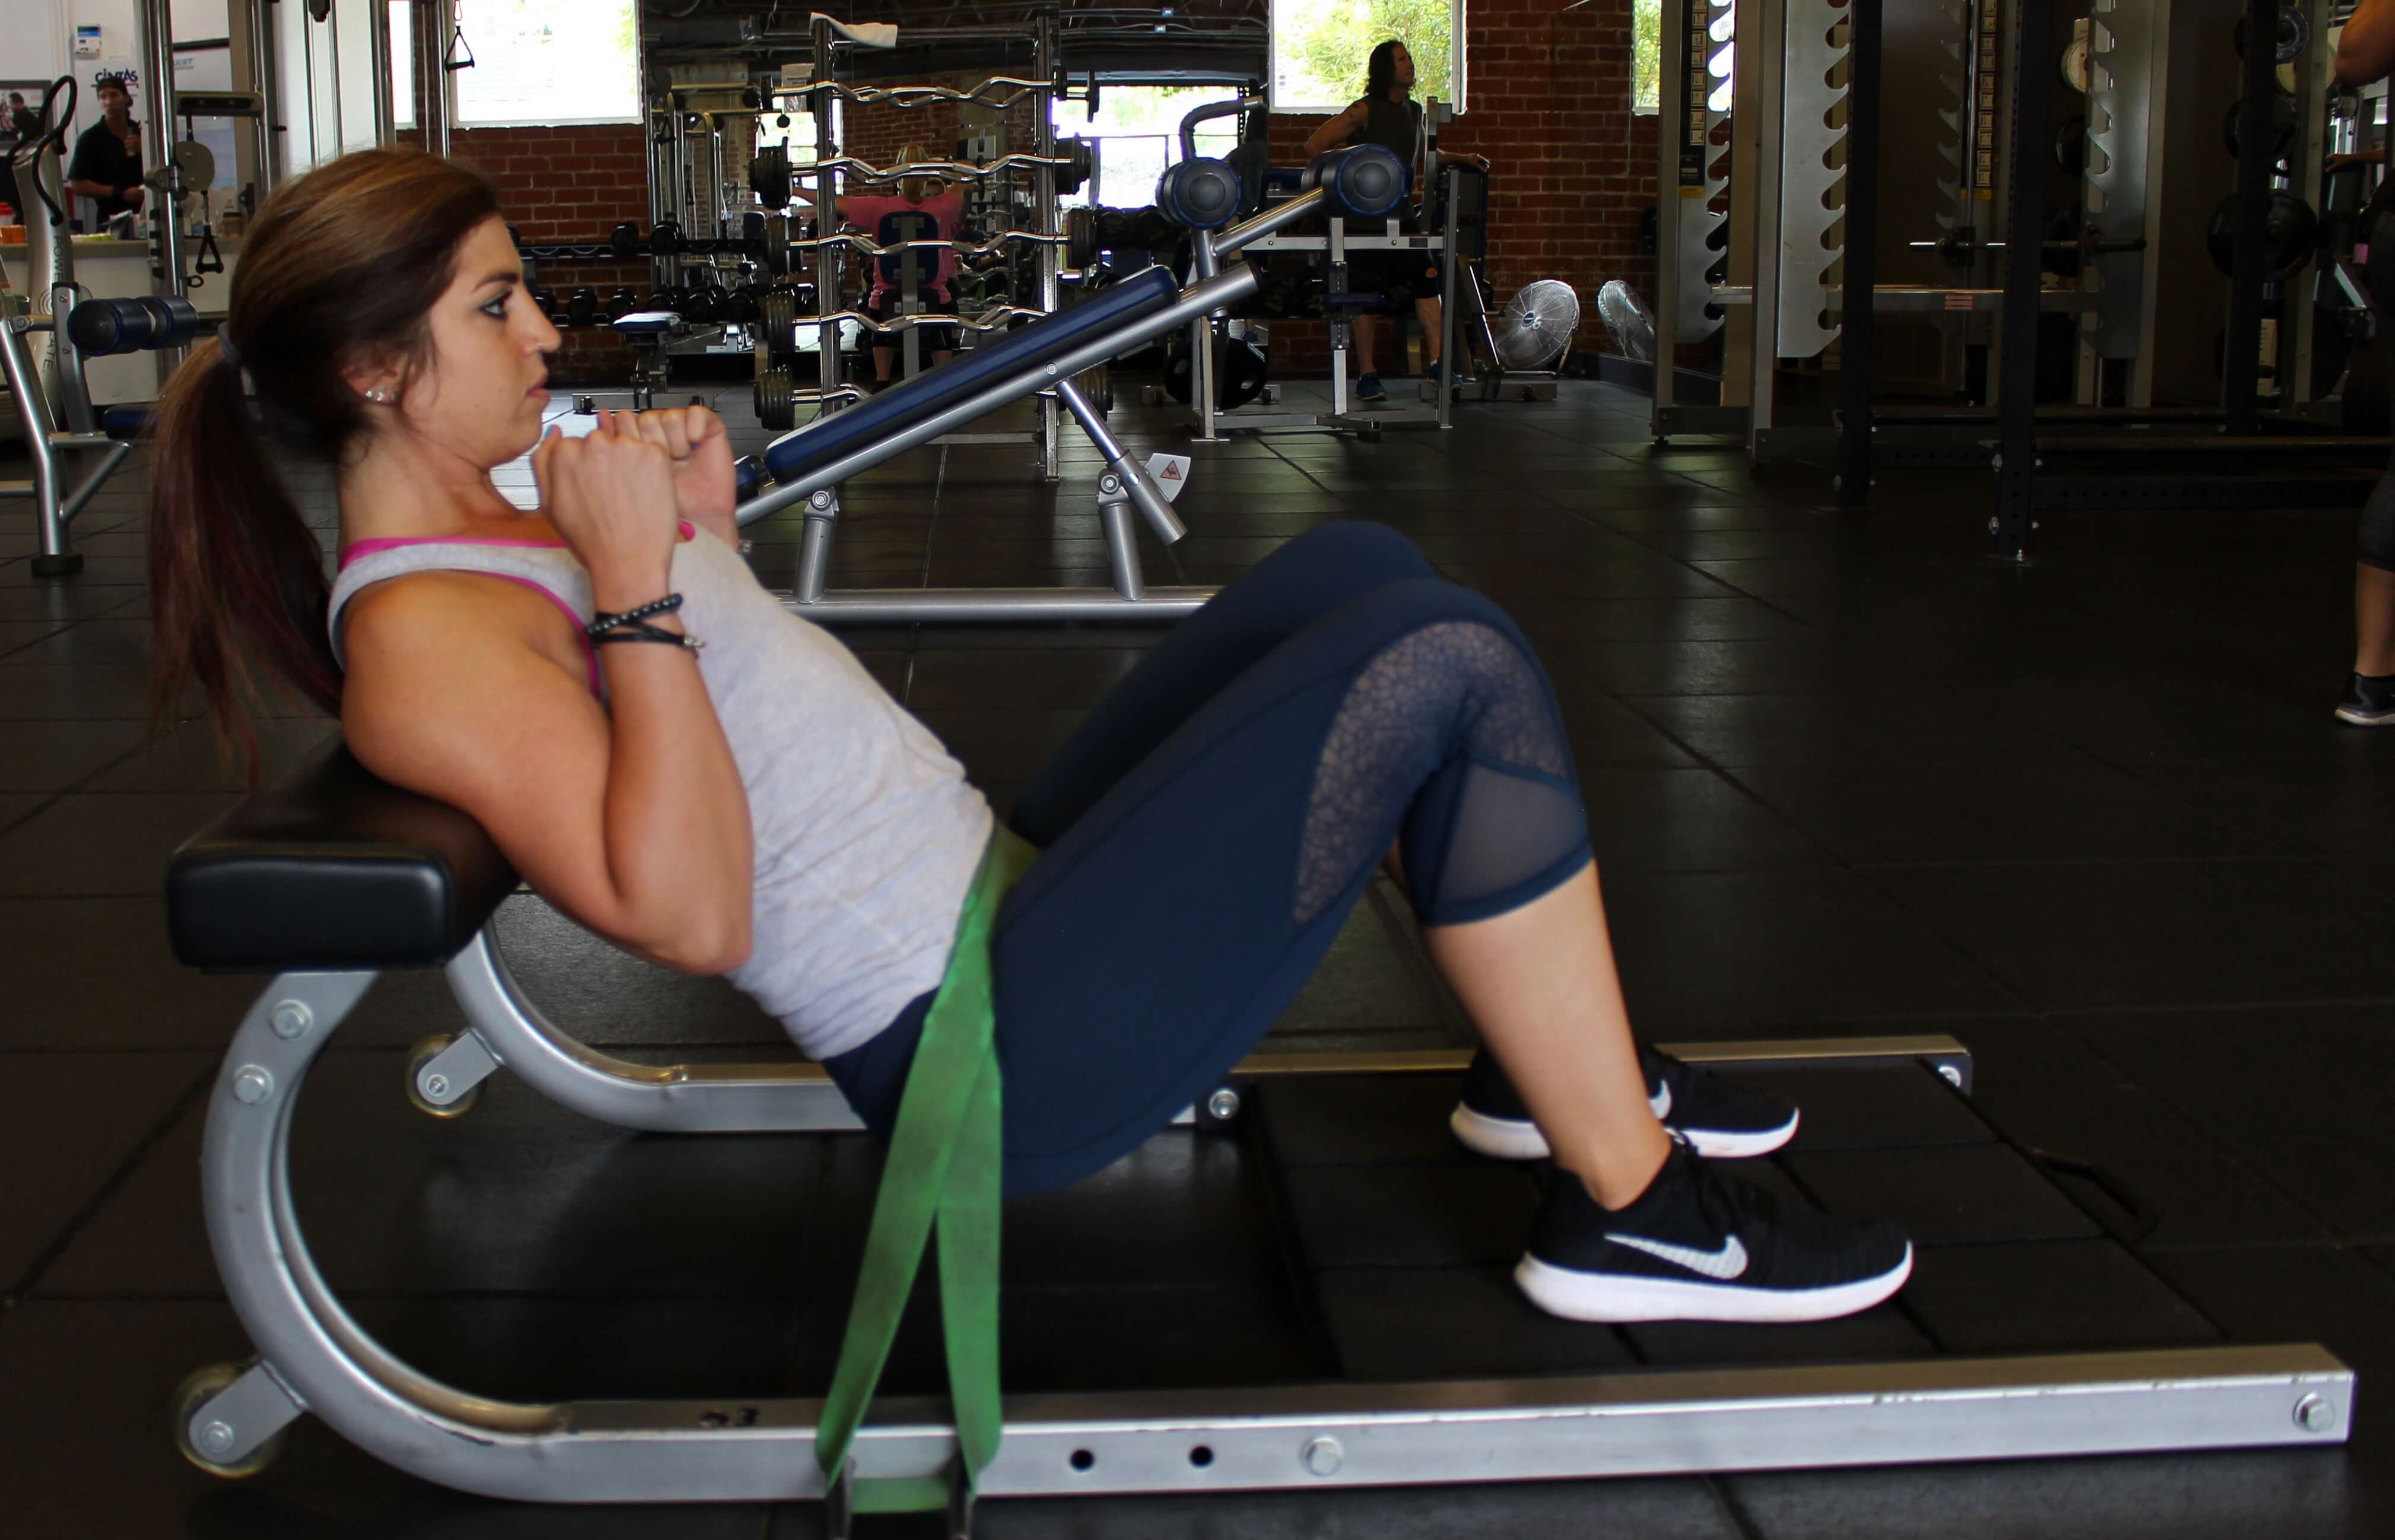 Try These Exercises Instead of Hip Thrusts